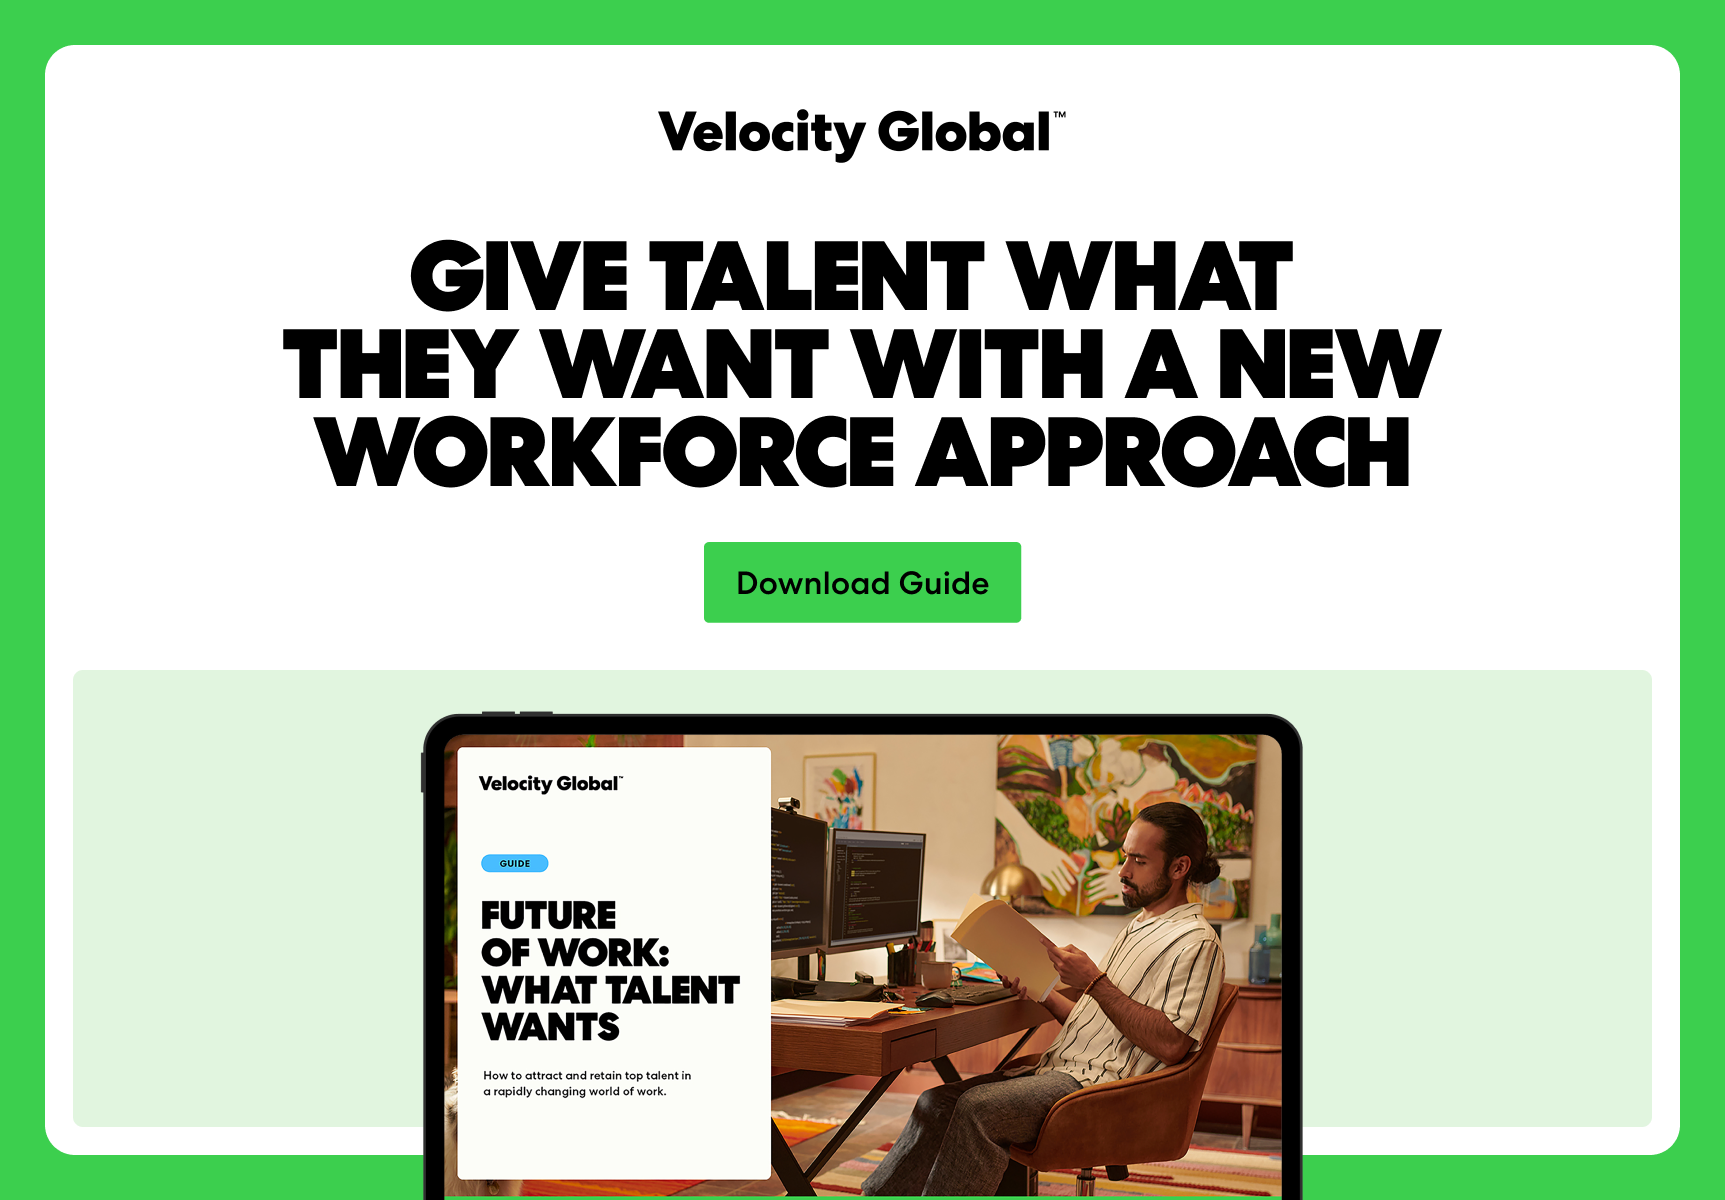 Download the "Give Talent What They Want With a New Workforce Approach"